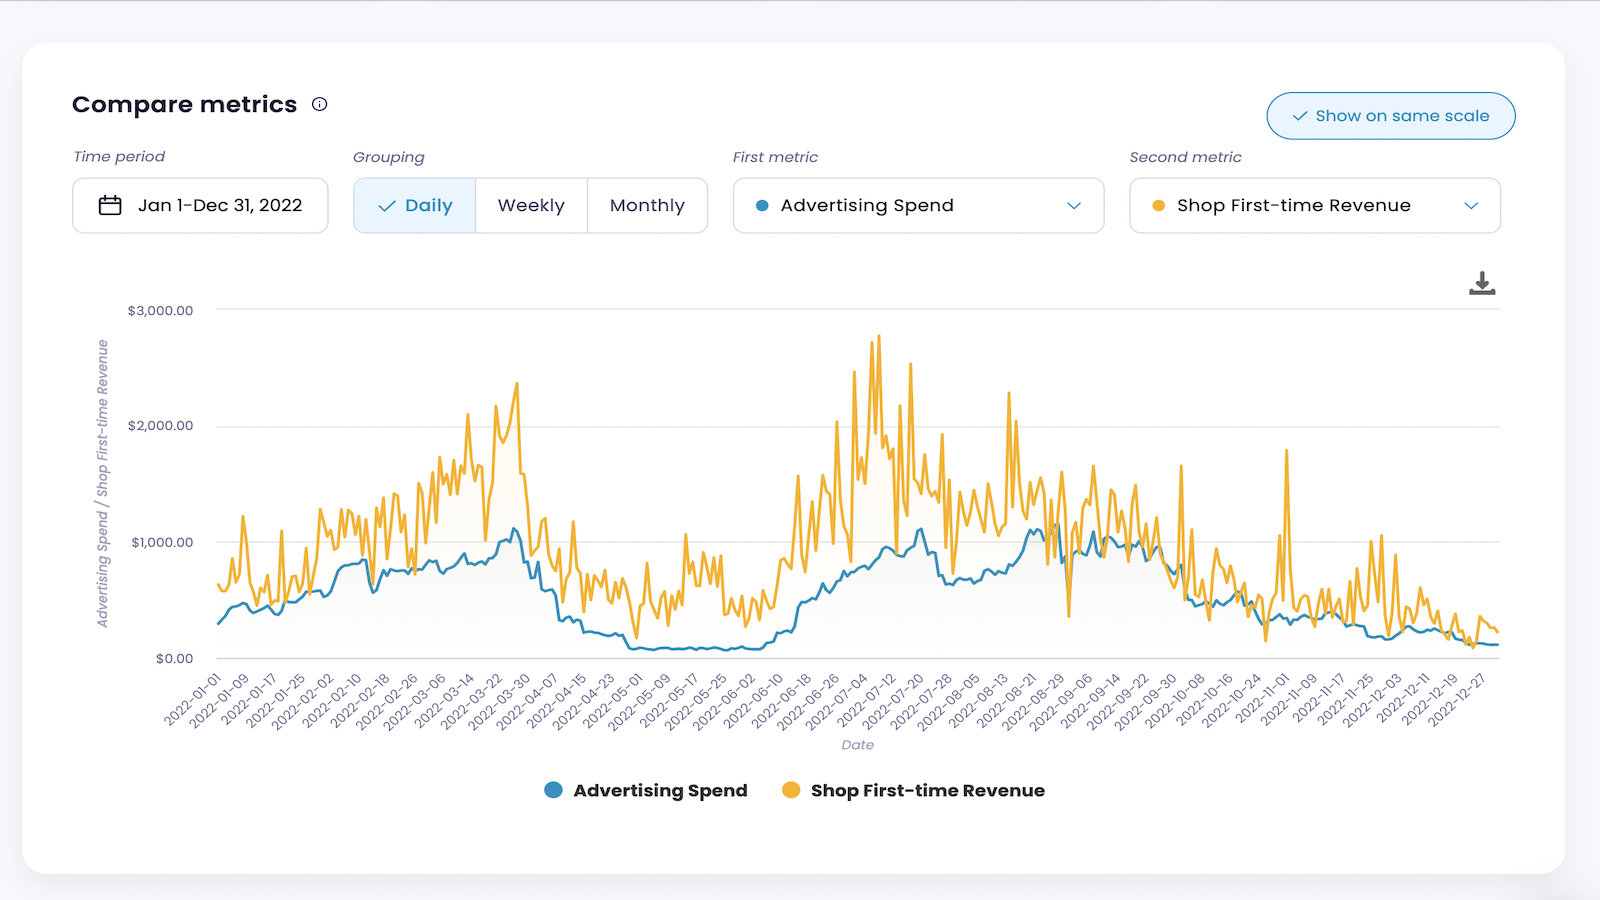 Compare metrics through time and detect trends and changes